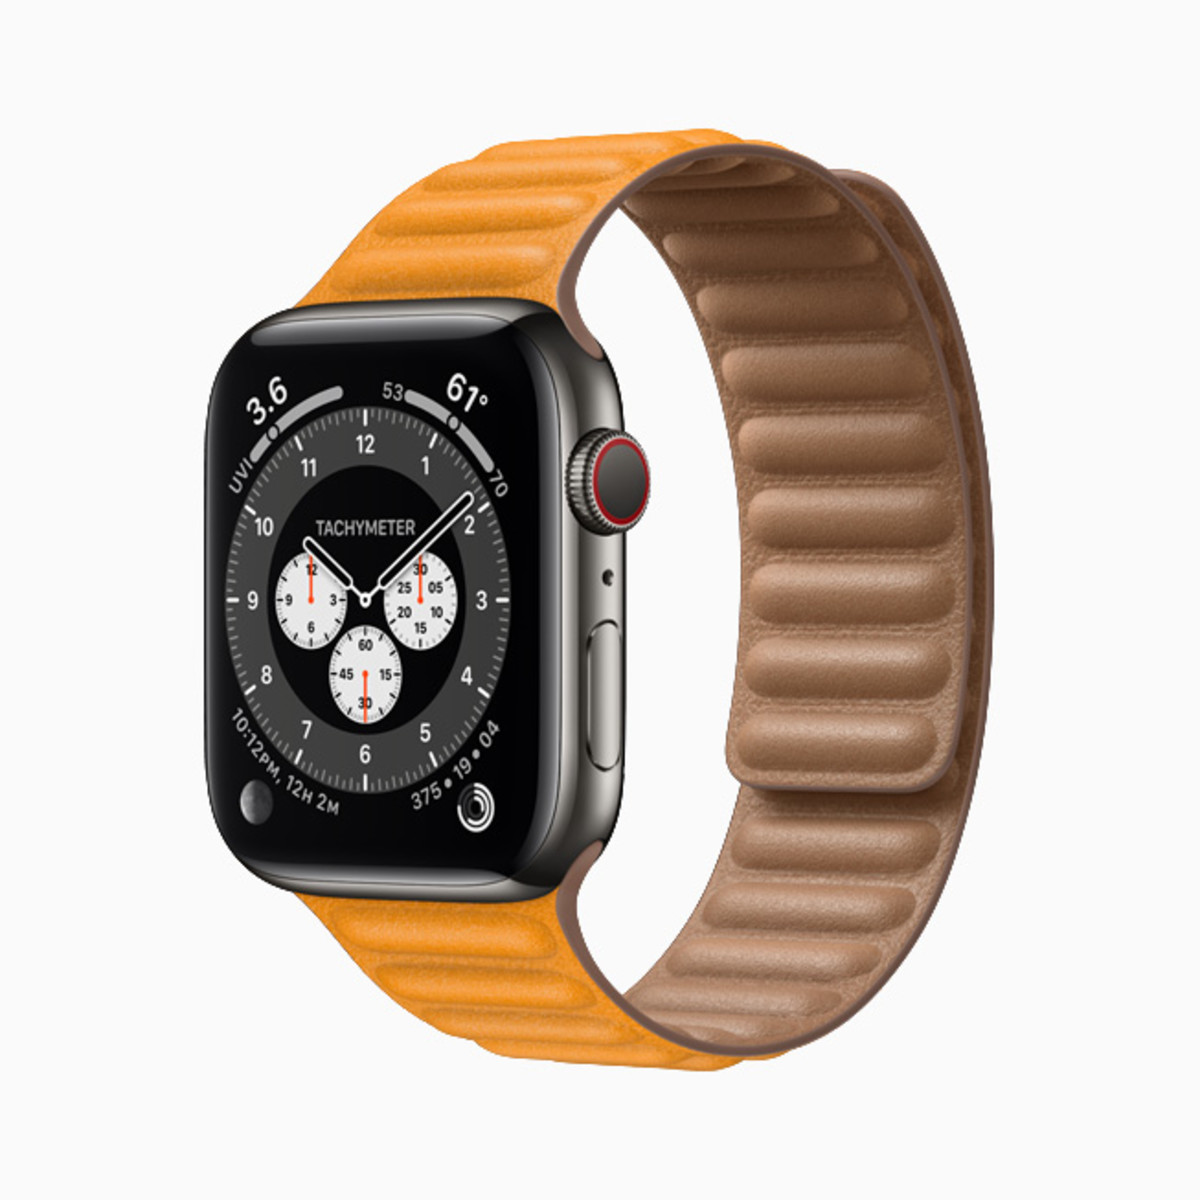 The Apple Watch Series 6 with SIM will retail for $399.